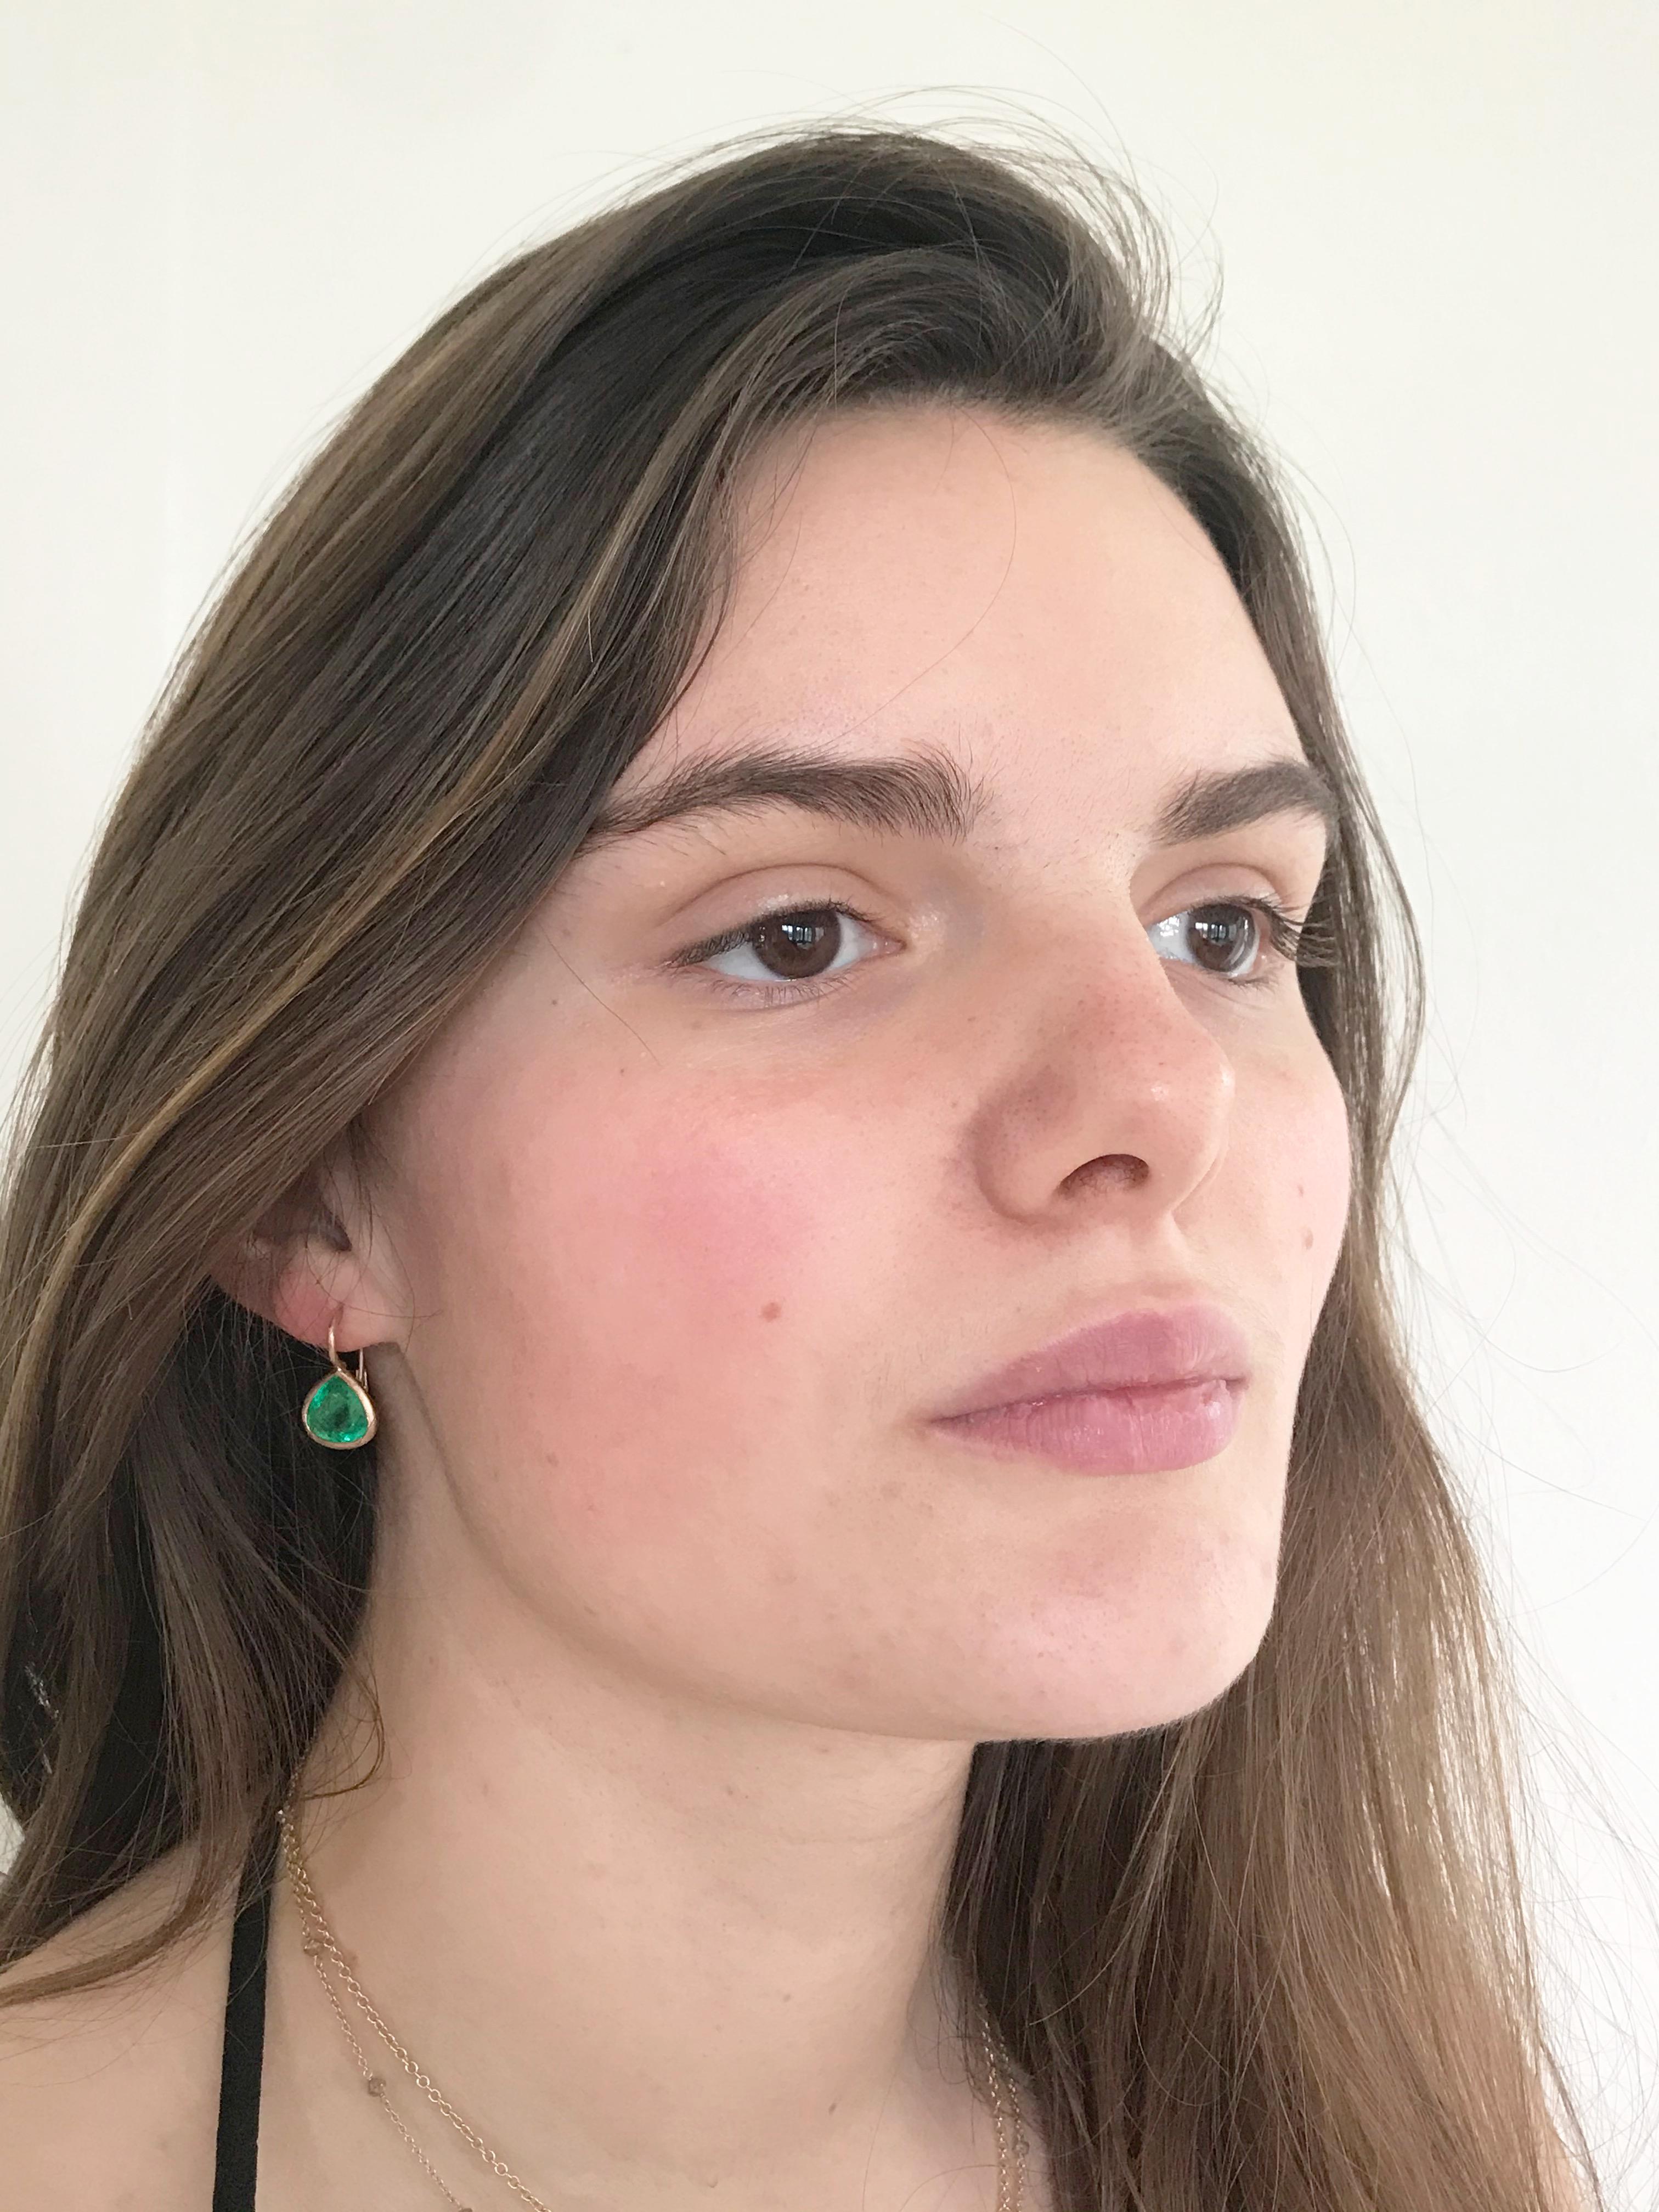 Dalben design  18k rose gold matte finishing earrings with two bezel-set pear faceted cut  emerald weight 5,36 carats . 
Bezel stone dimensions :
 width 11,5  mm
height without leverback 11  mm
height with leverback 19,5 mm
The earrings has been